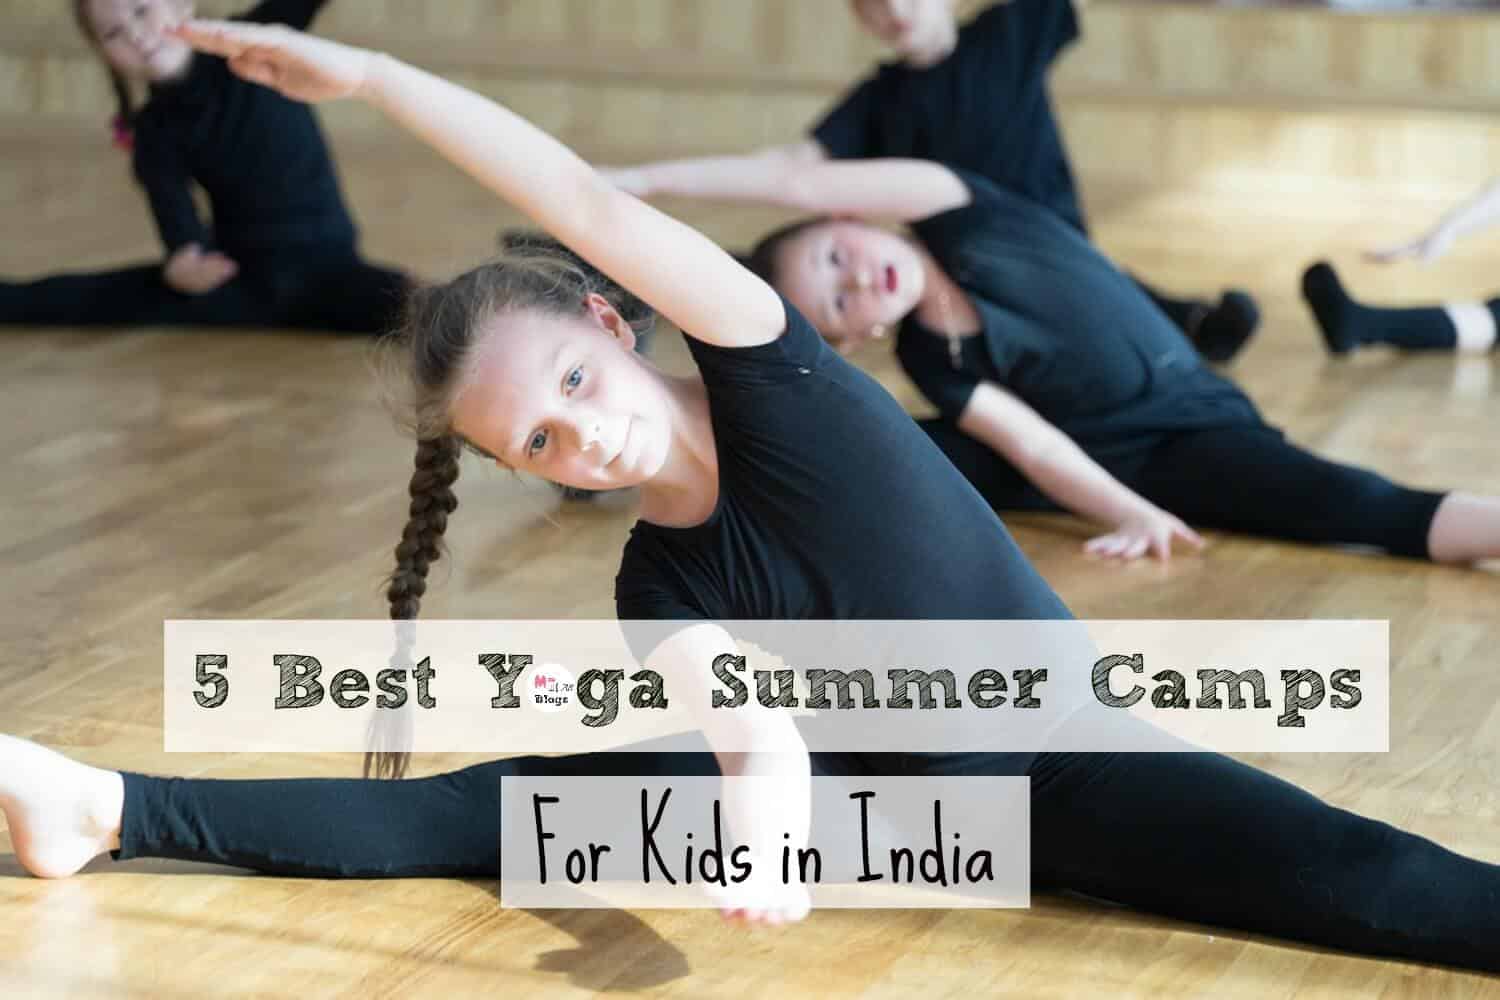 5 Best Yoga Summer Camps For Kids In India